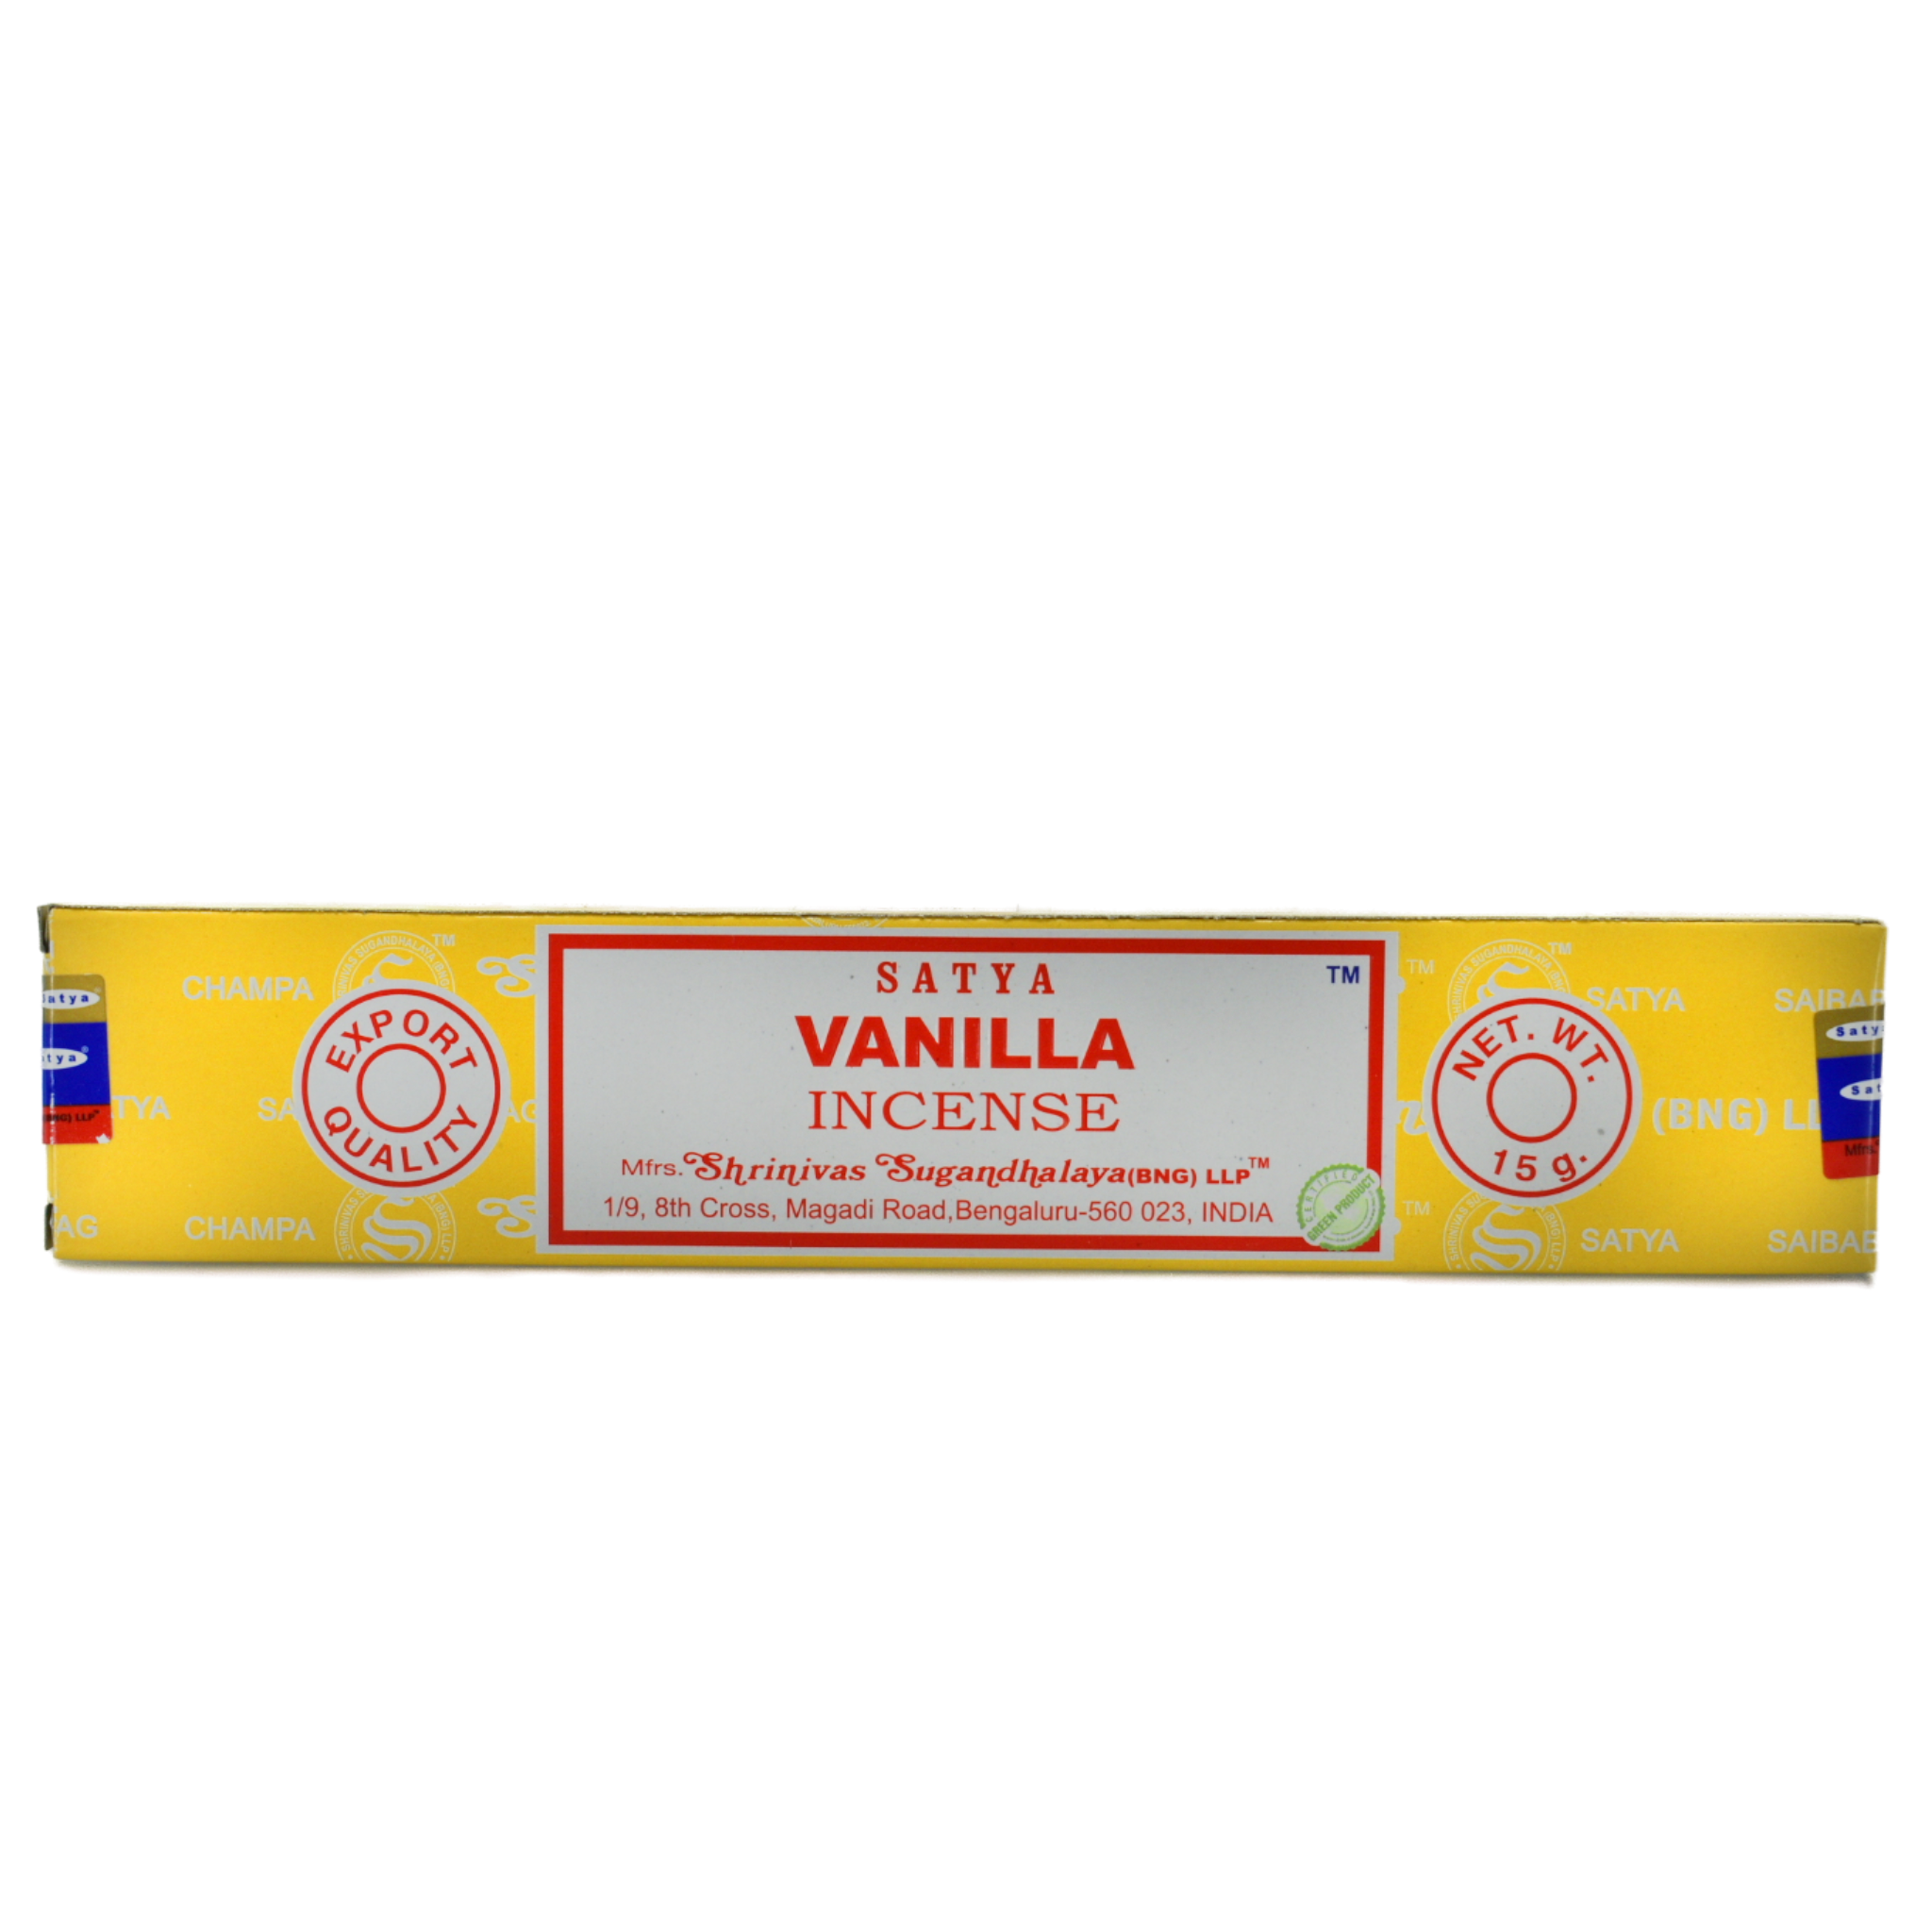 Vanilla Incense Sticks.  Box is yellow with white lines that have company words as a design. The center of the box has a white rectangle with a red frame within the border. In the rectangle the top line has the company name. The next rows have the title Vanilla Incense. At the bottom of the rectangle is the manufacturer's information. On both sides are a circle. The left circle says Export Quality and the right side circle says Net. Weight 15 grams.